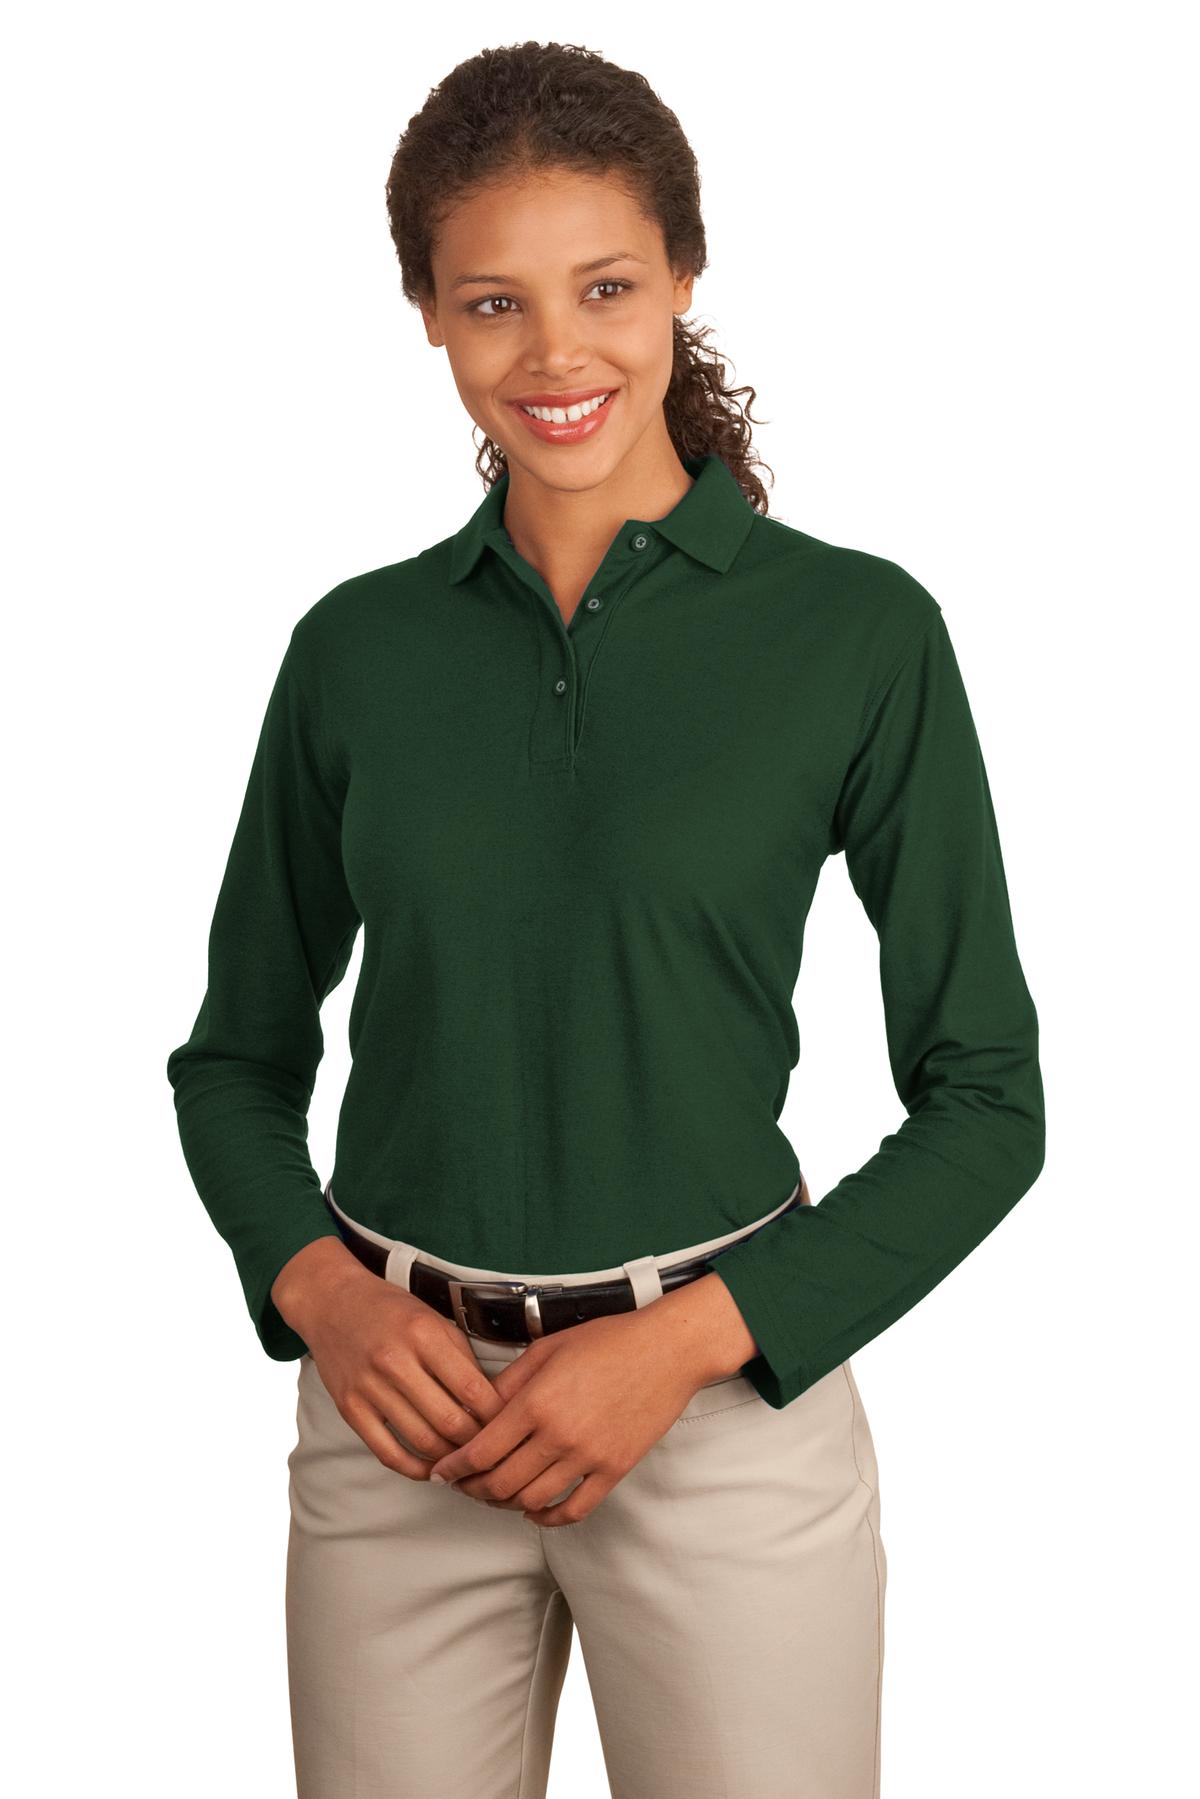 Port Authority Ladies Long Sleeve Silk Touch Polo - image 1 of 1